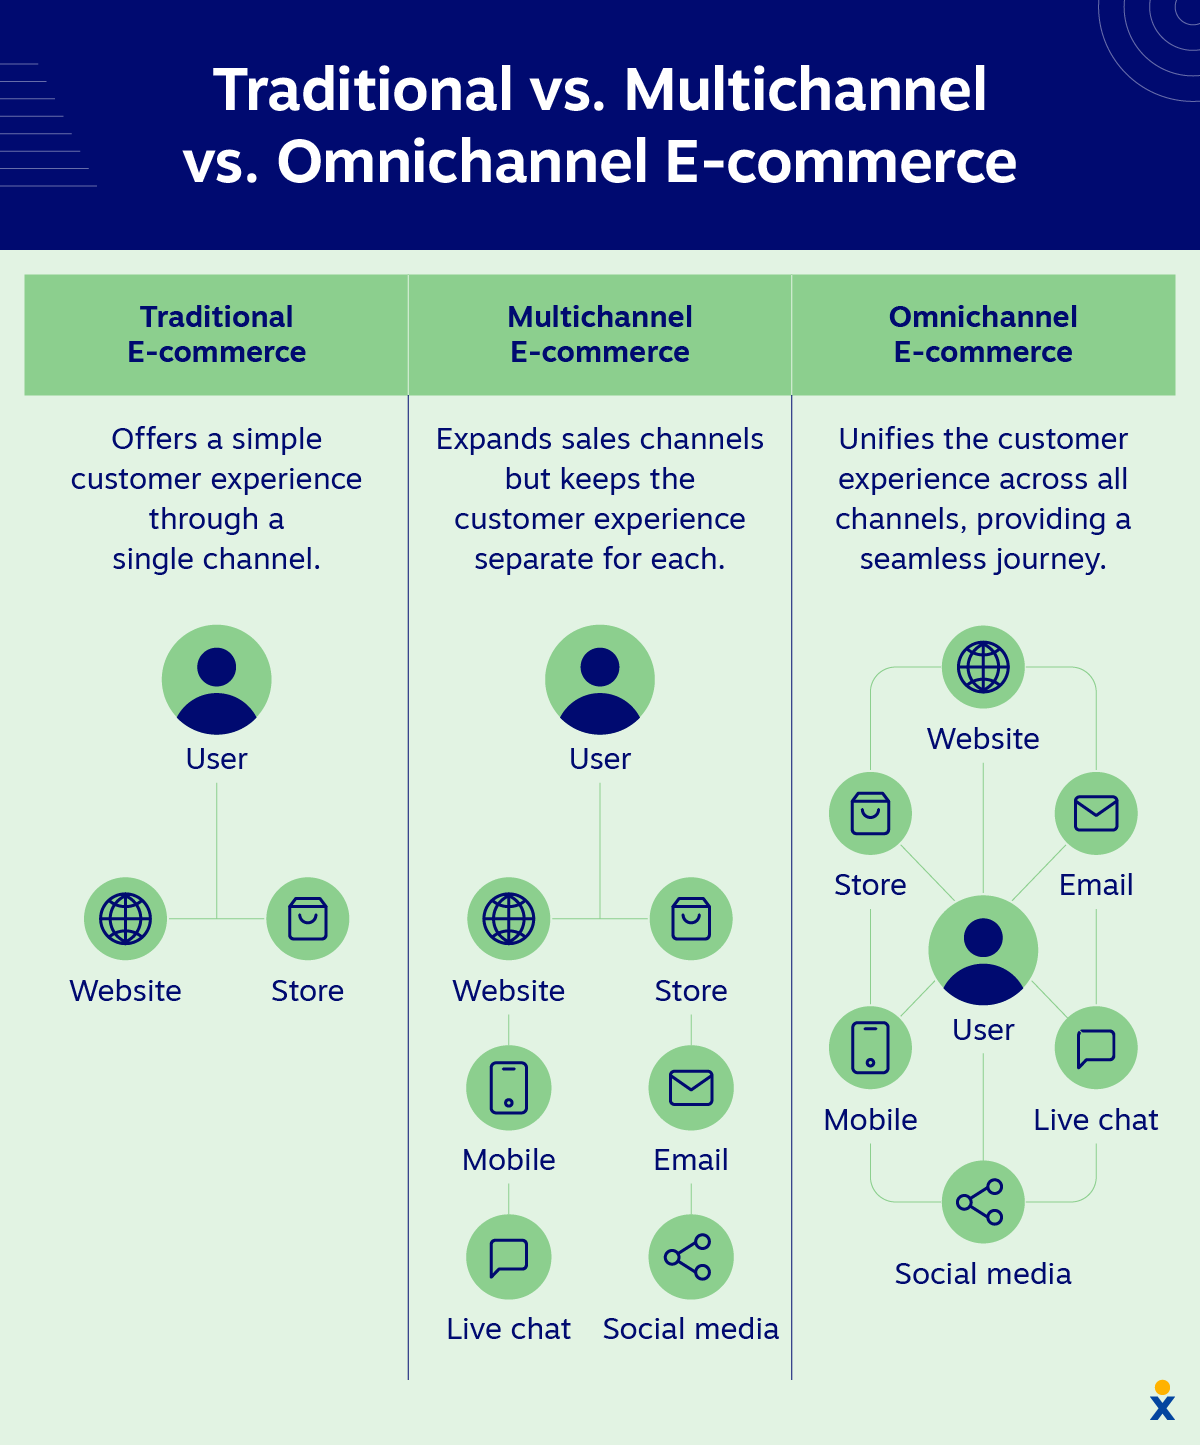 A diagram shows the differences between traditional vs. multichannel vs. omnichannel e-commerce